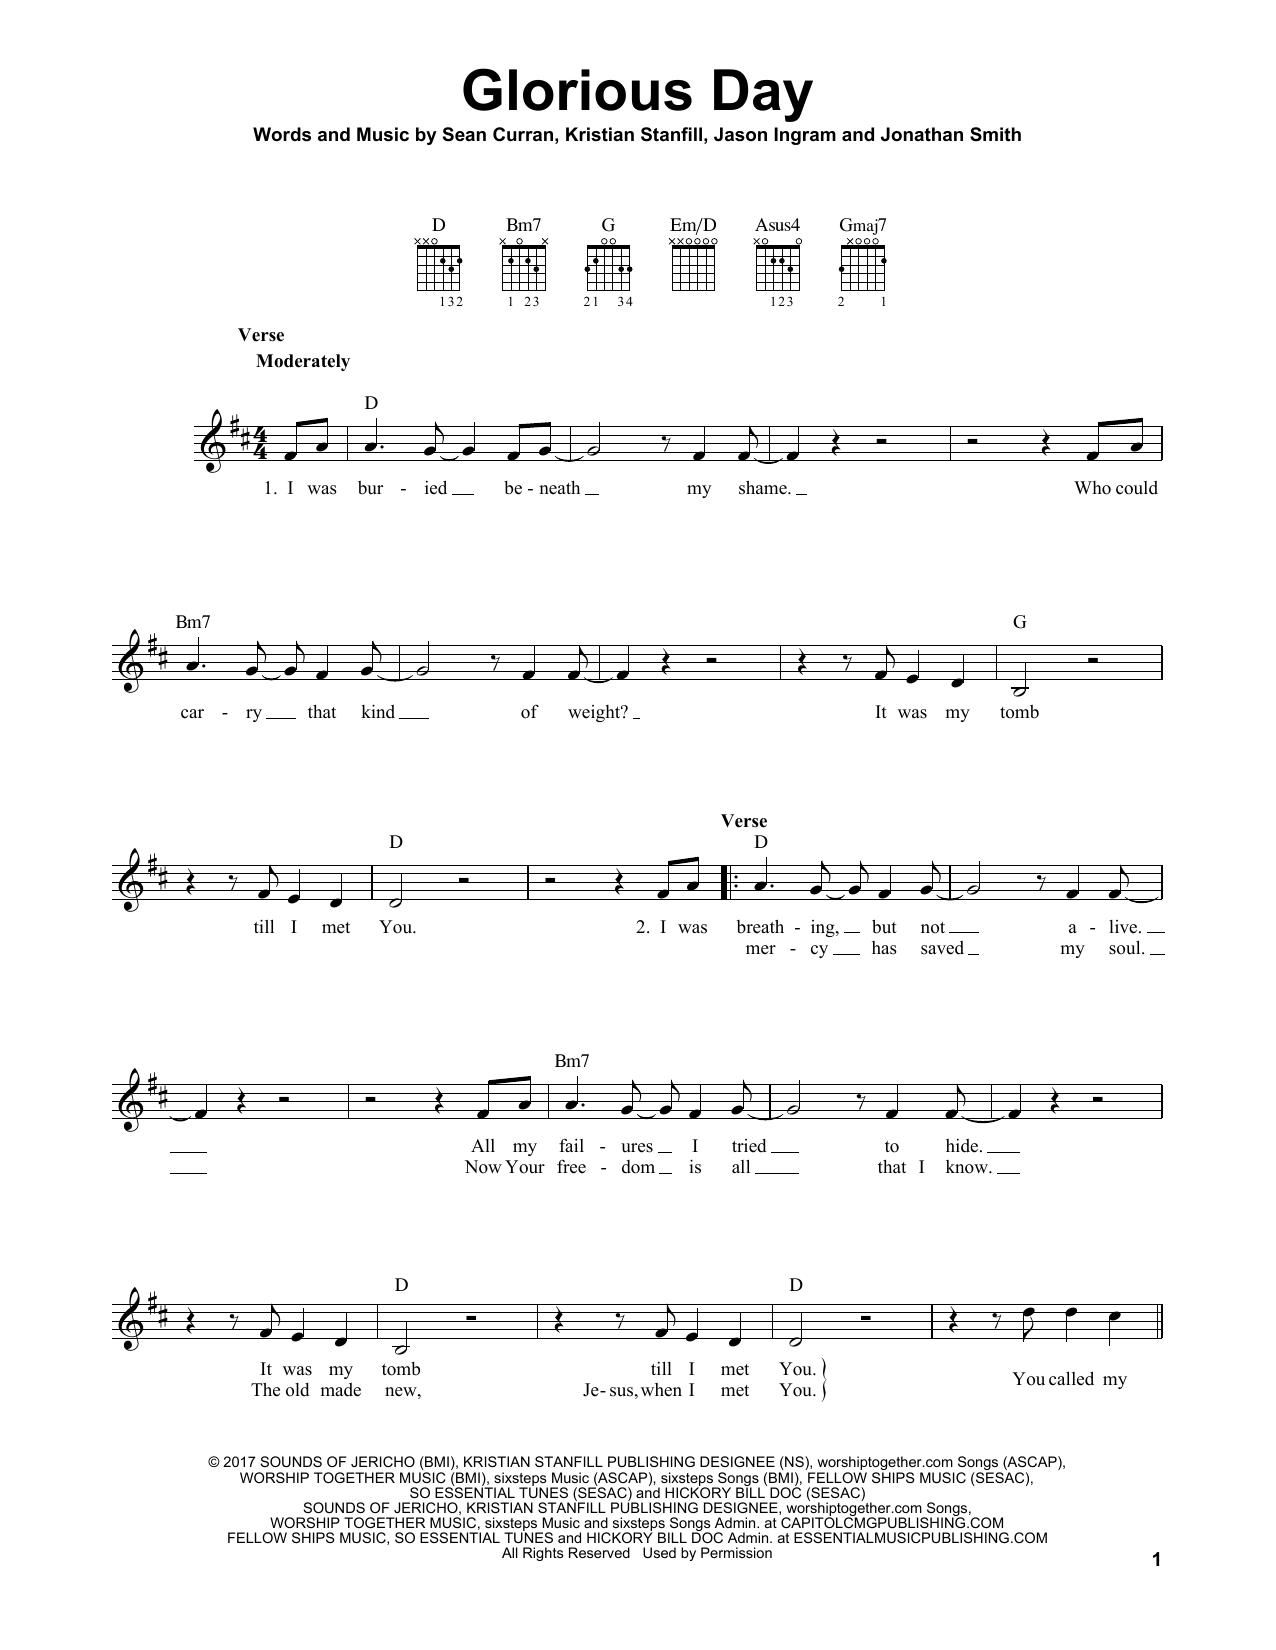 Download Passion Glorious Day Sheet Music